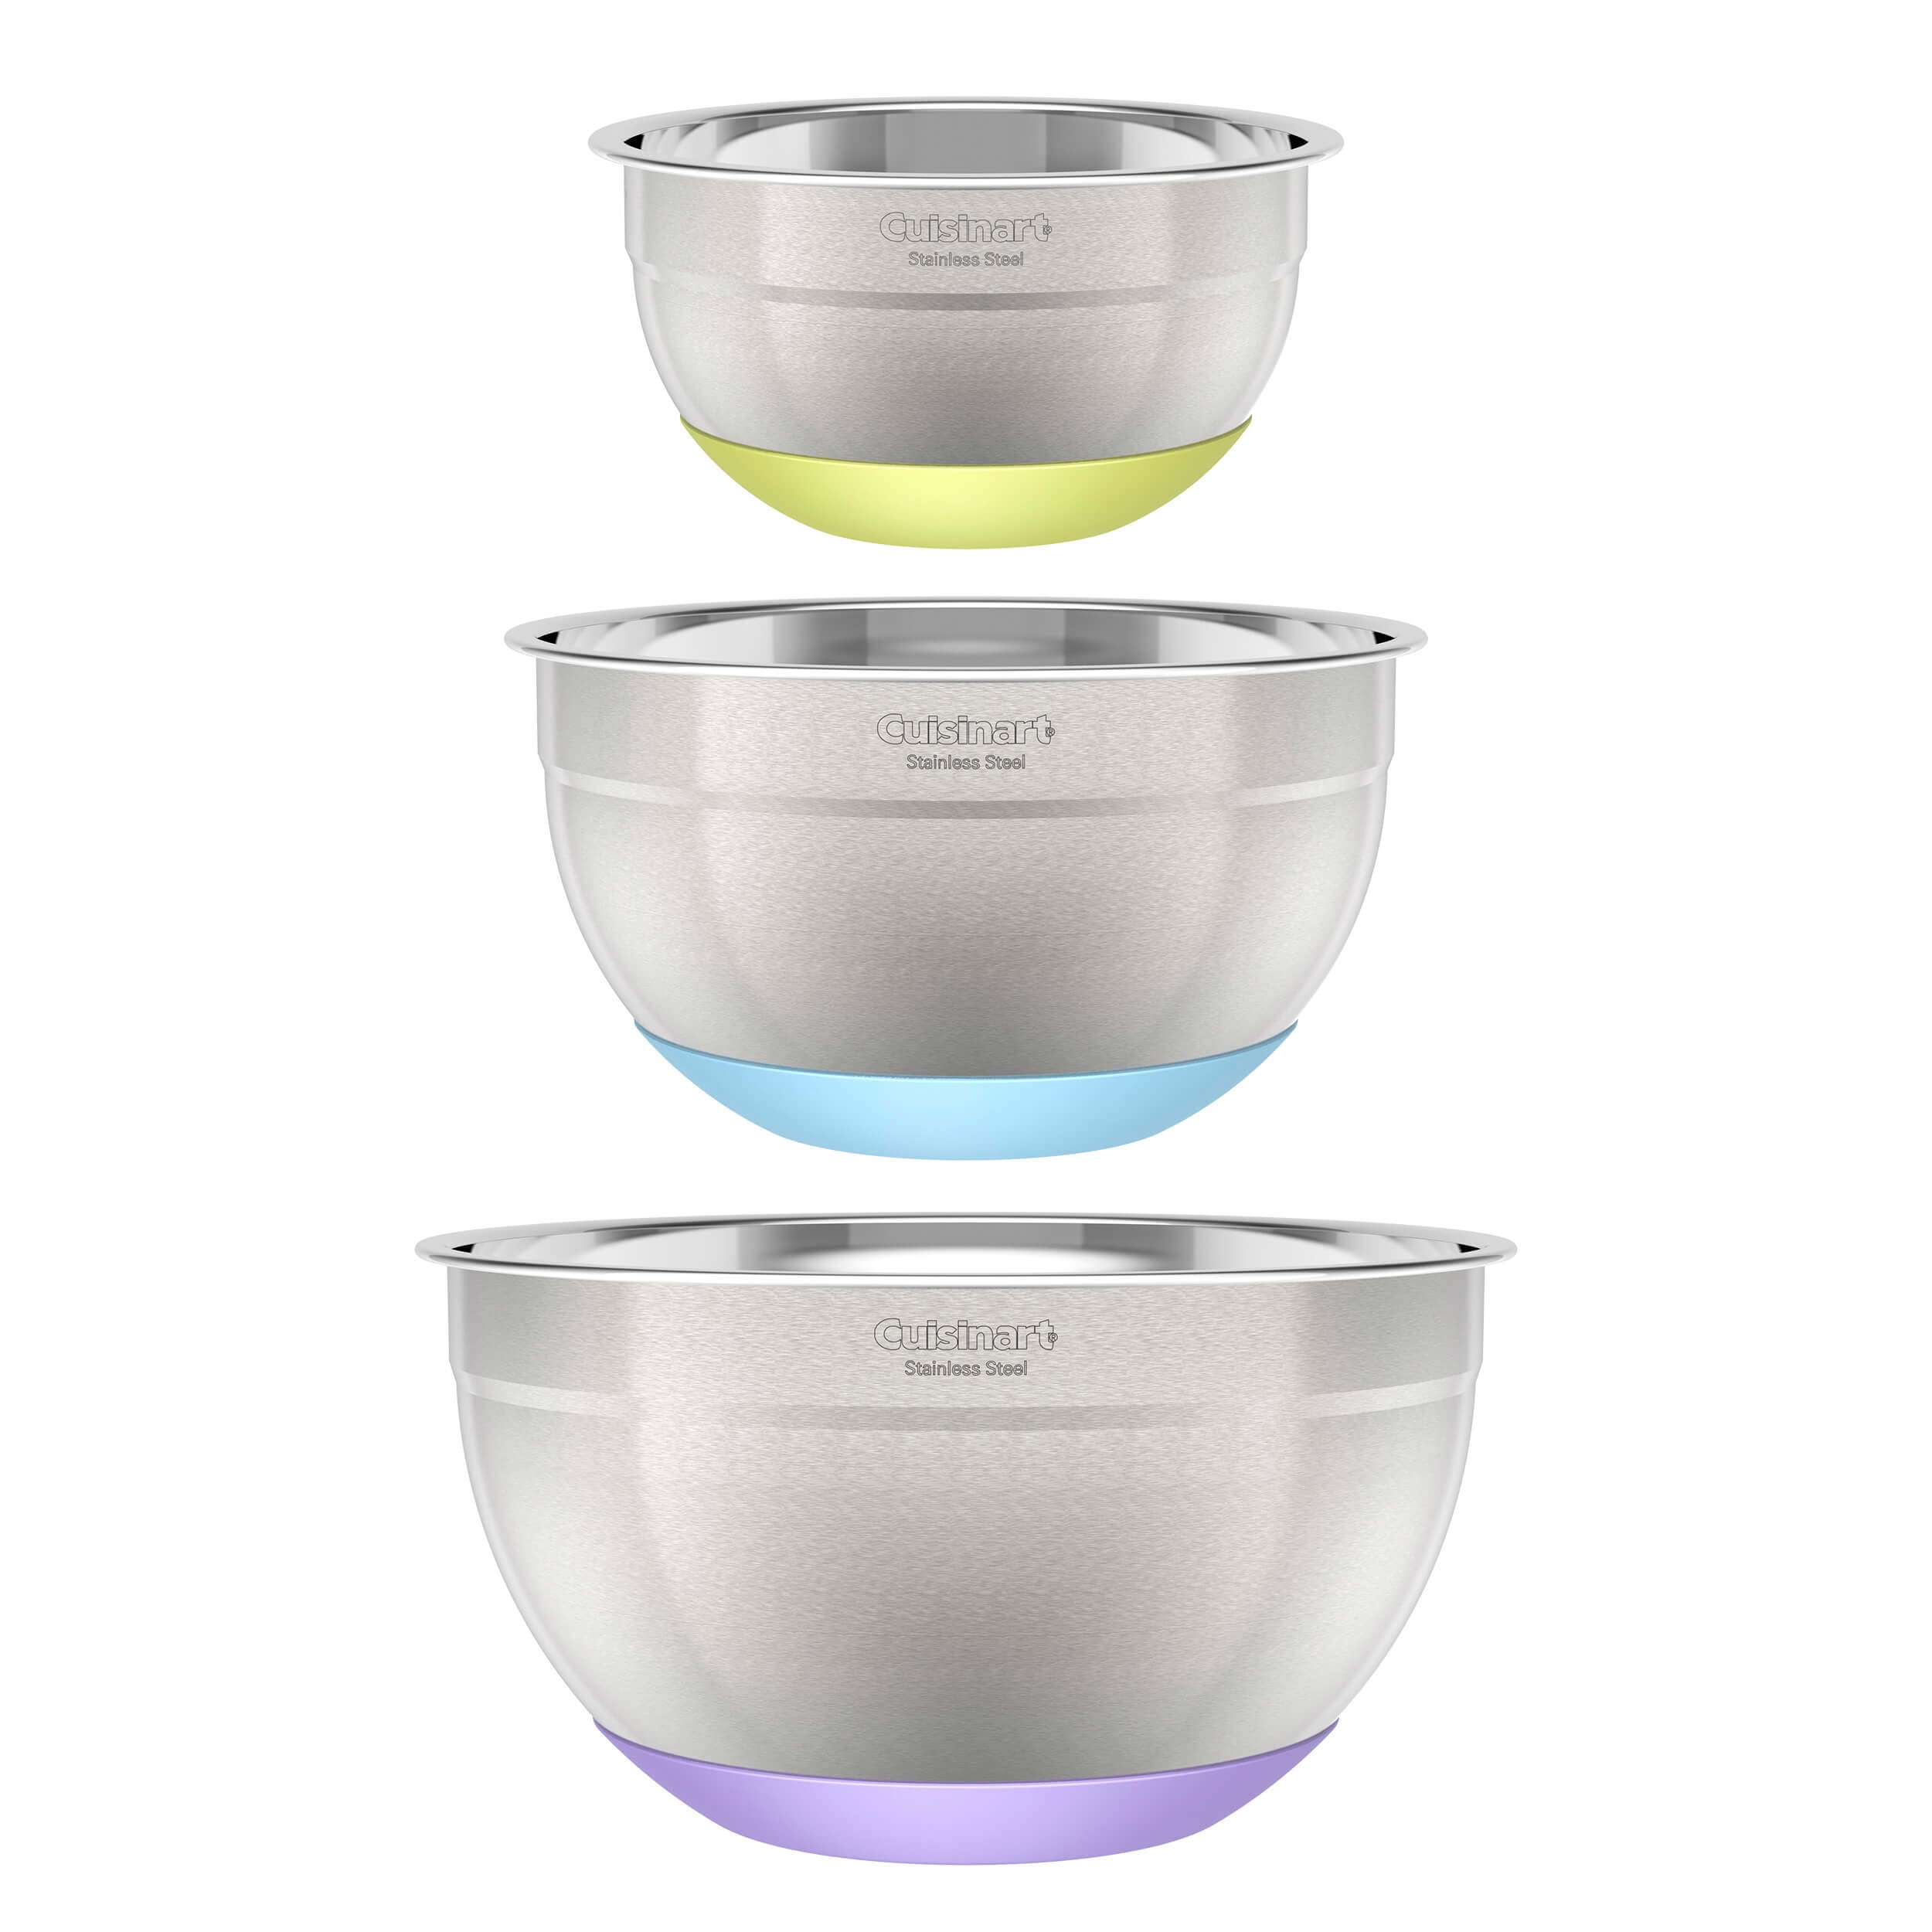  Cuisinart Mixing Bowl Set, Stainless Steel, 3-Piece